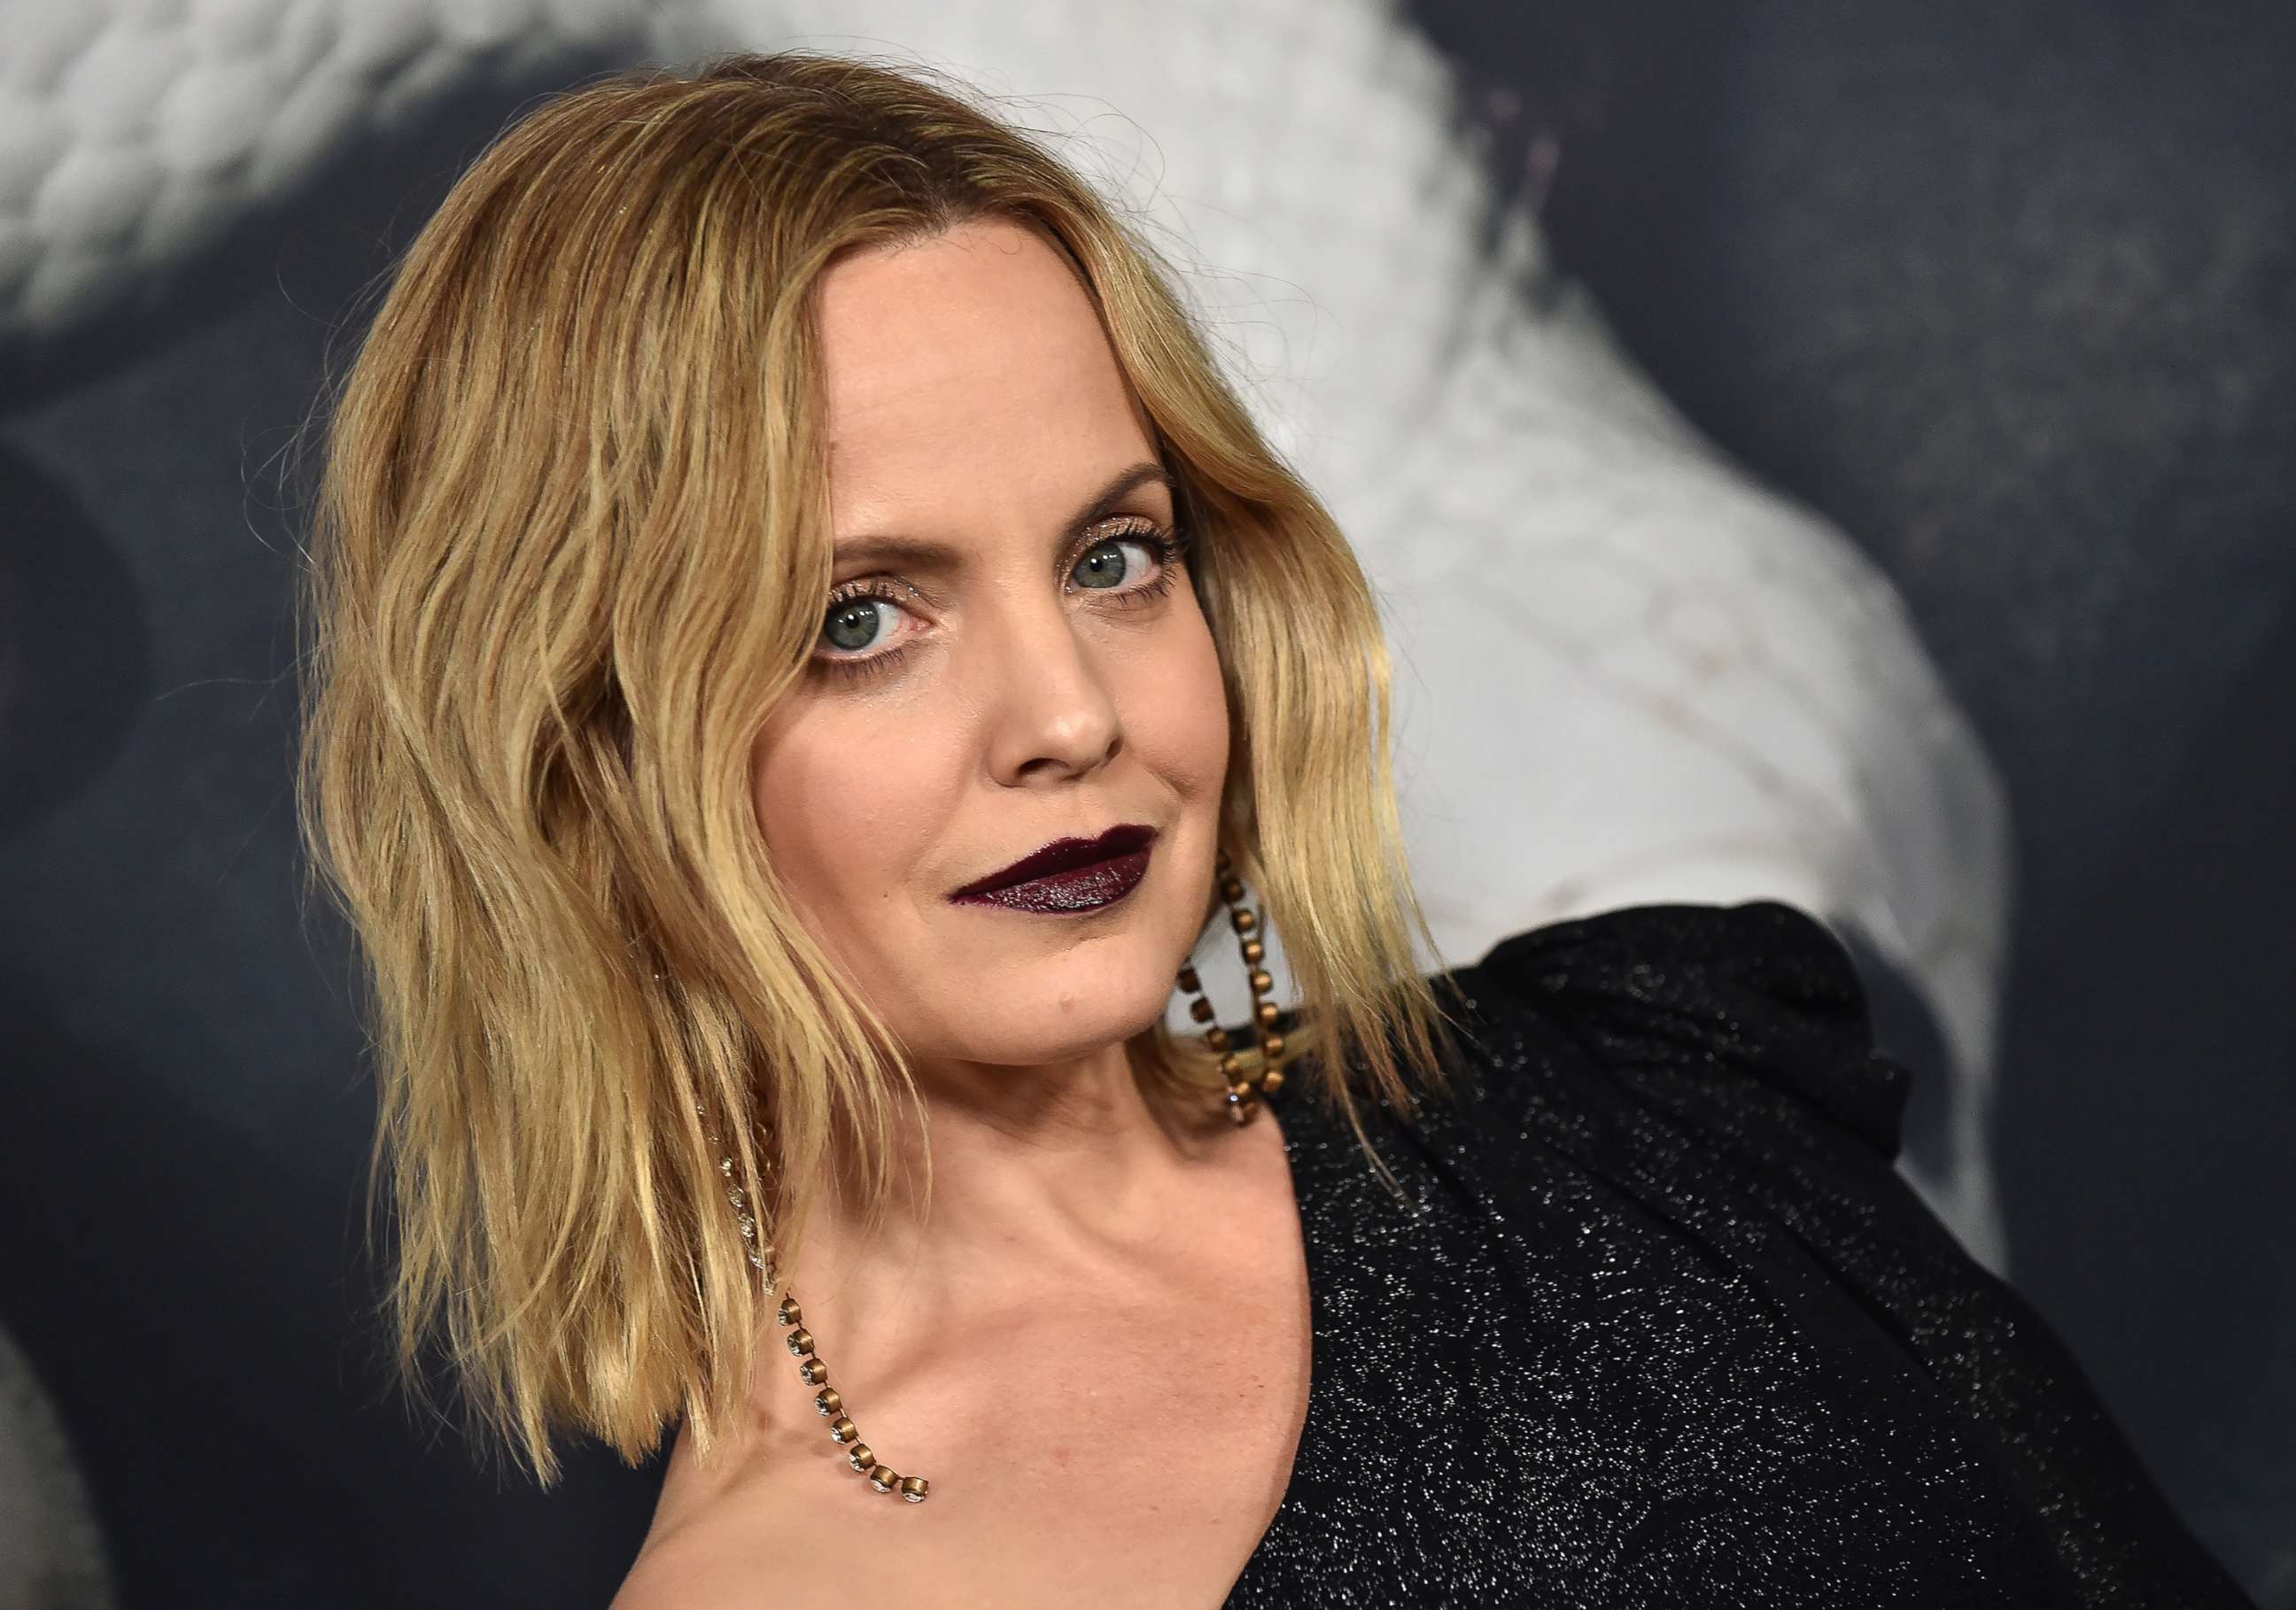 PHOTO: Mena Suvari arrives for the Red Carpet event celebrating 100 episodes of FX's "American Horror Story" in Los Angeles, Oct. 26, 2019. 